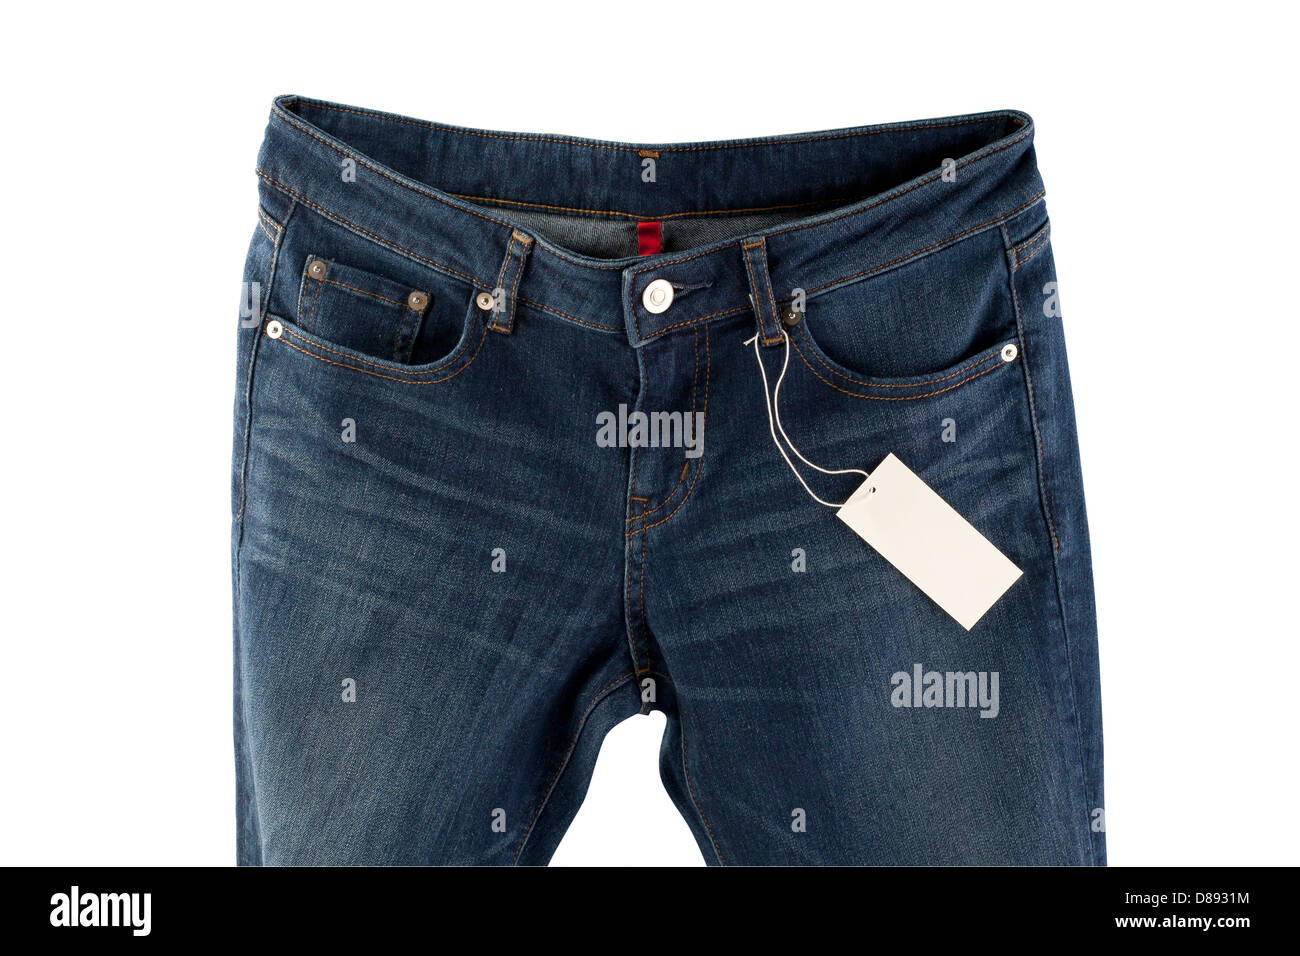 Paper Tag On Jeans, Branded Label On New Pants Stock Photo, Picture and  Royalty Free Image. Image 76938218.